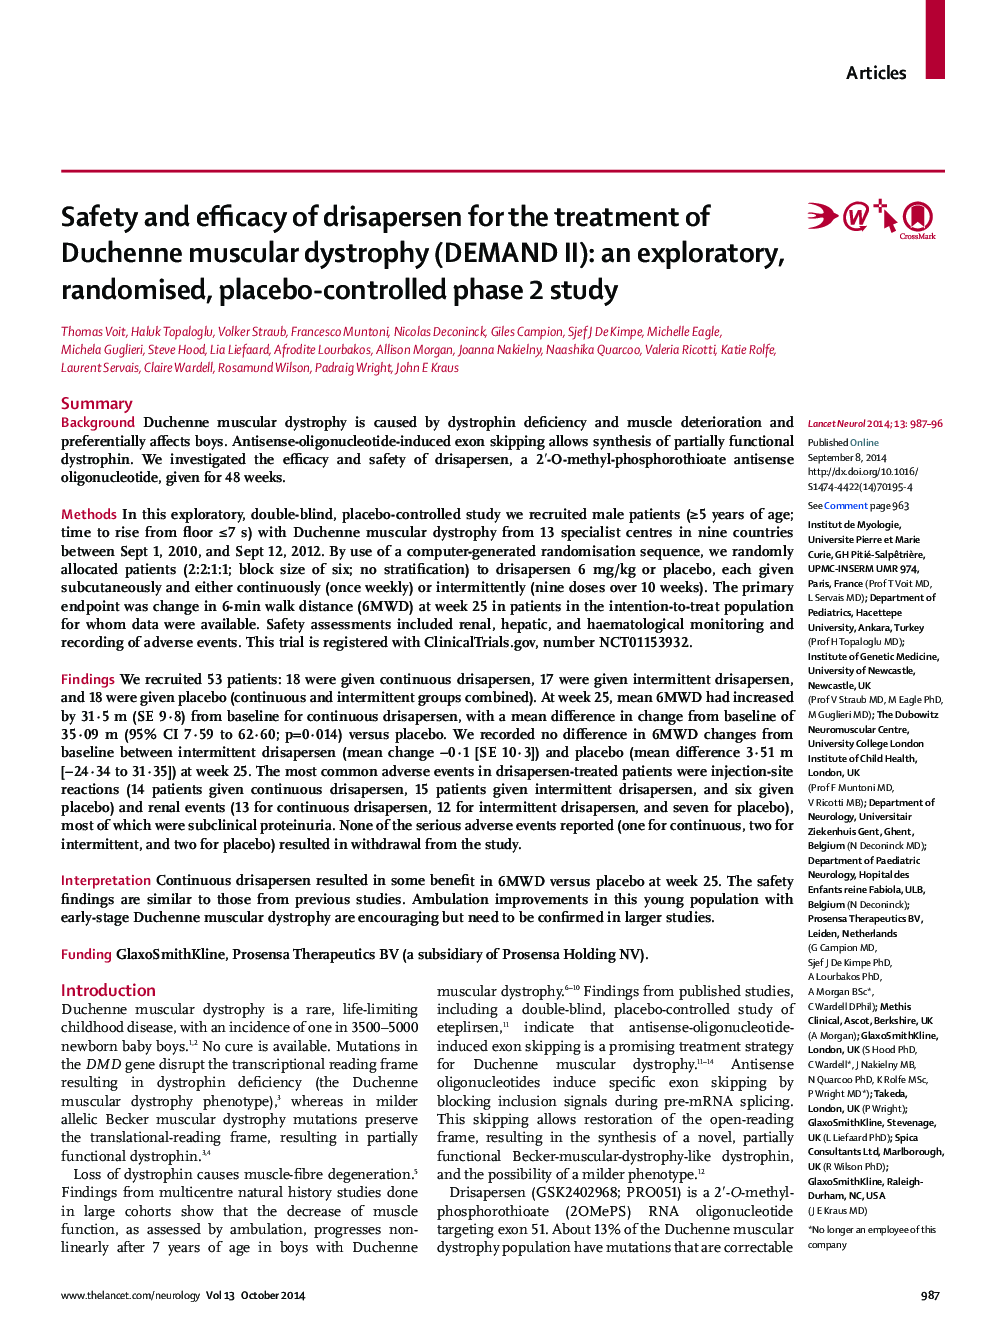 Safety and efficacy of drisapersen for the treatment of Duchenne muscular dystrophy (DEMAND II): an exploratory, randomised, placebo-controlled phase 2 study